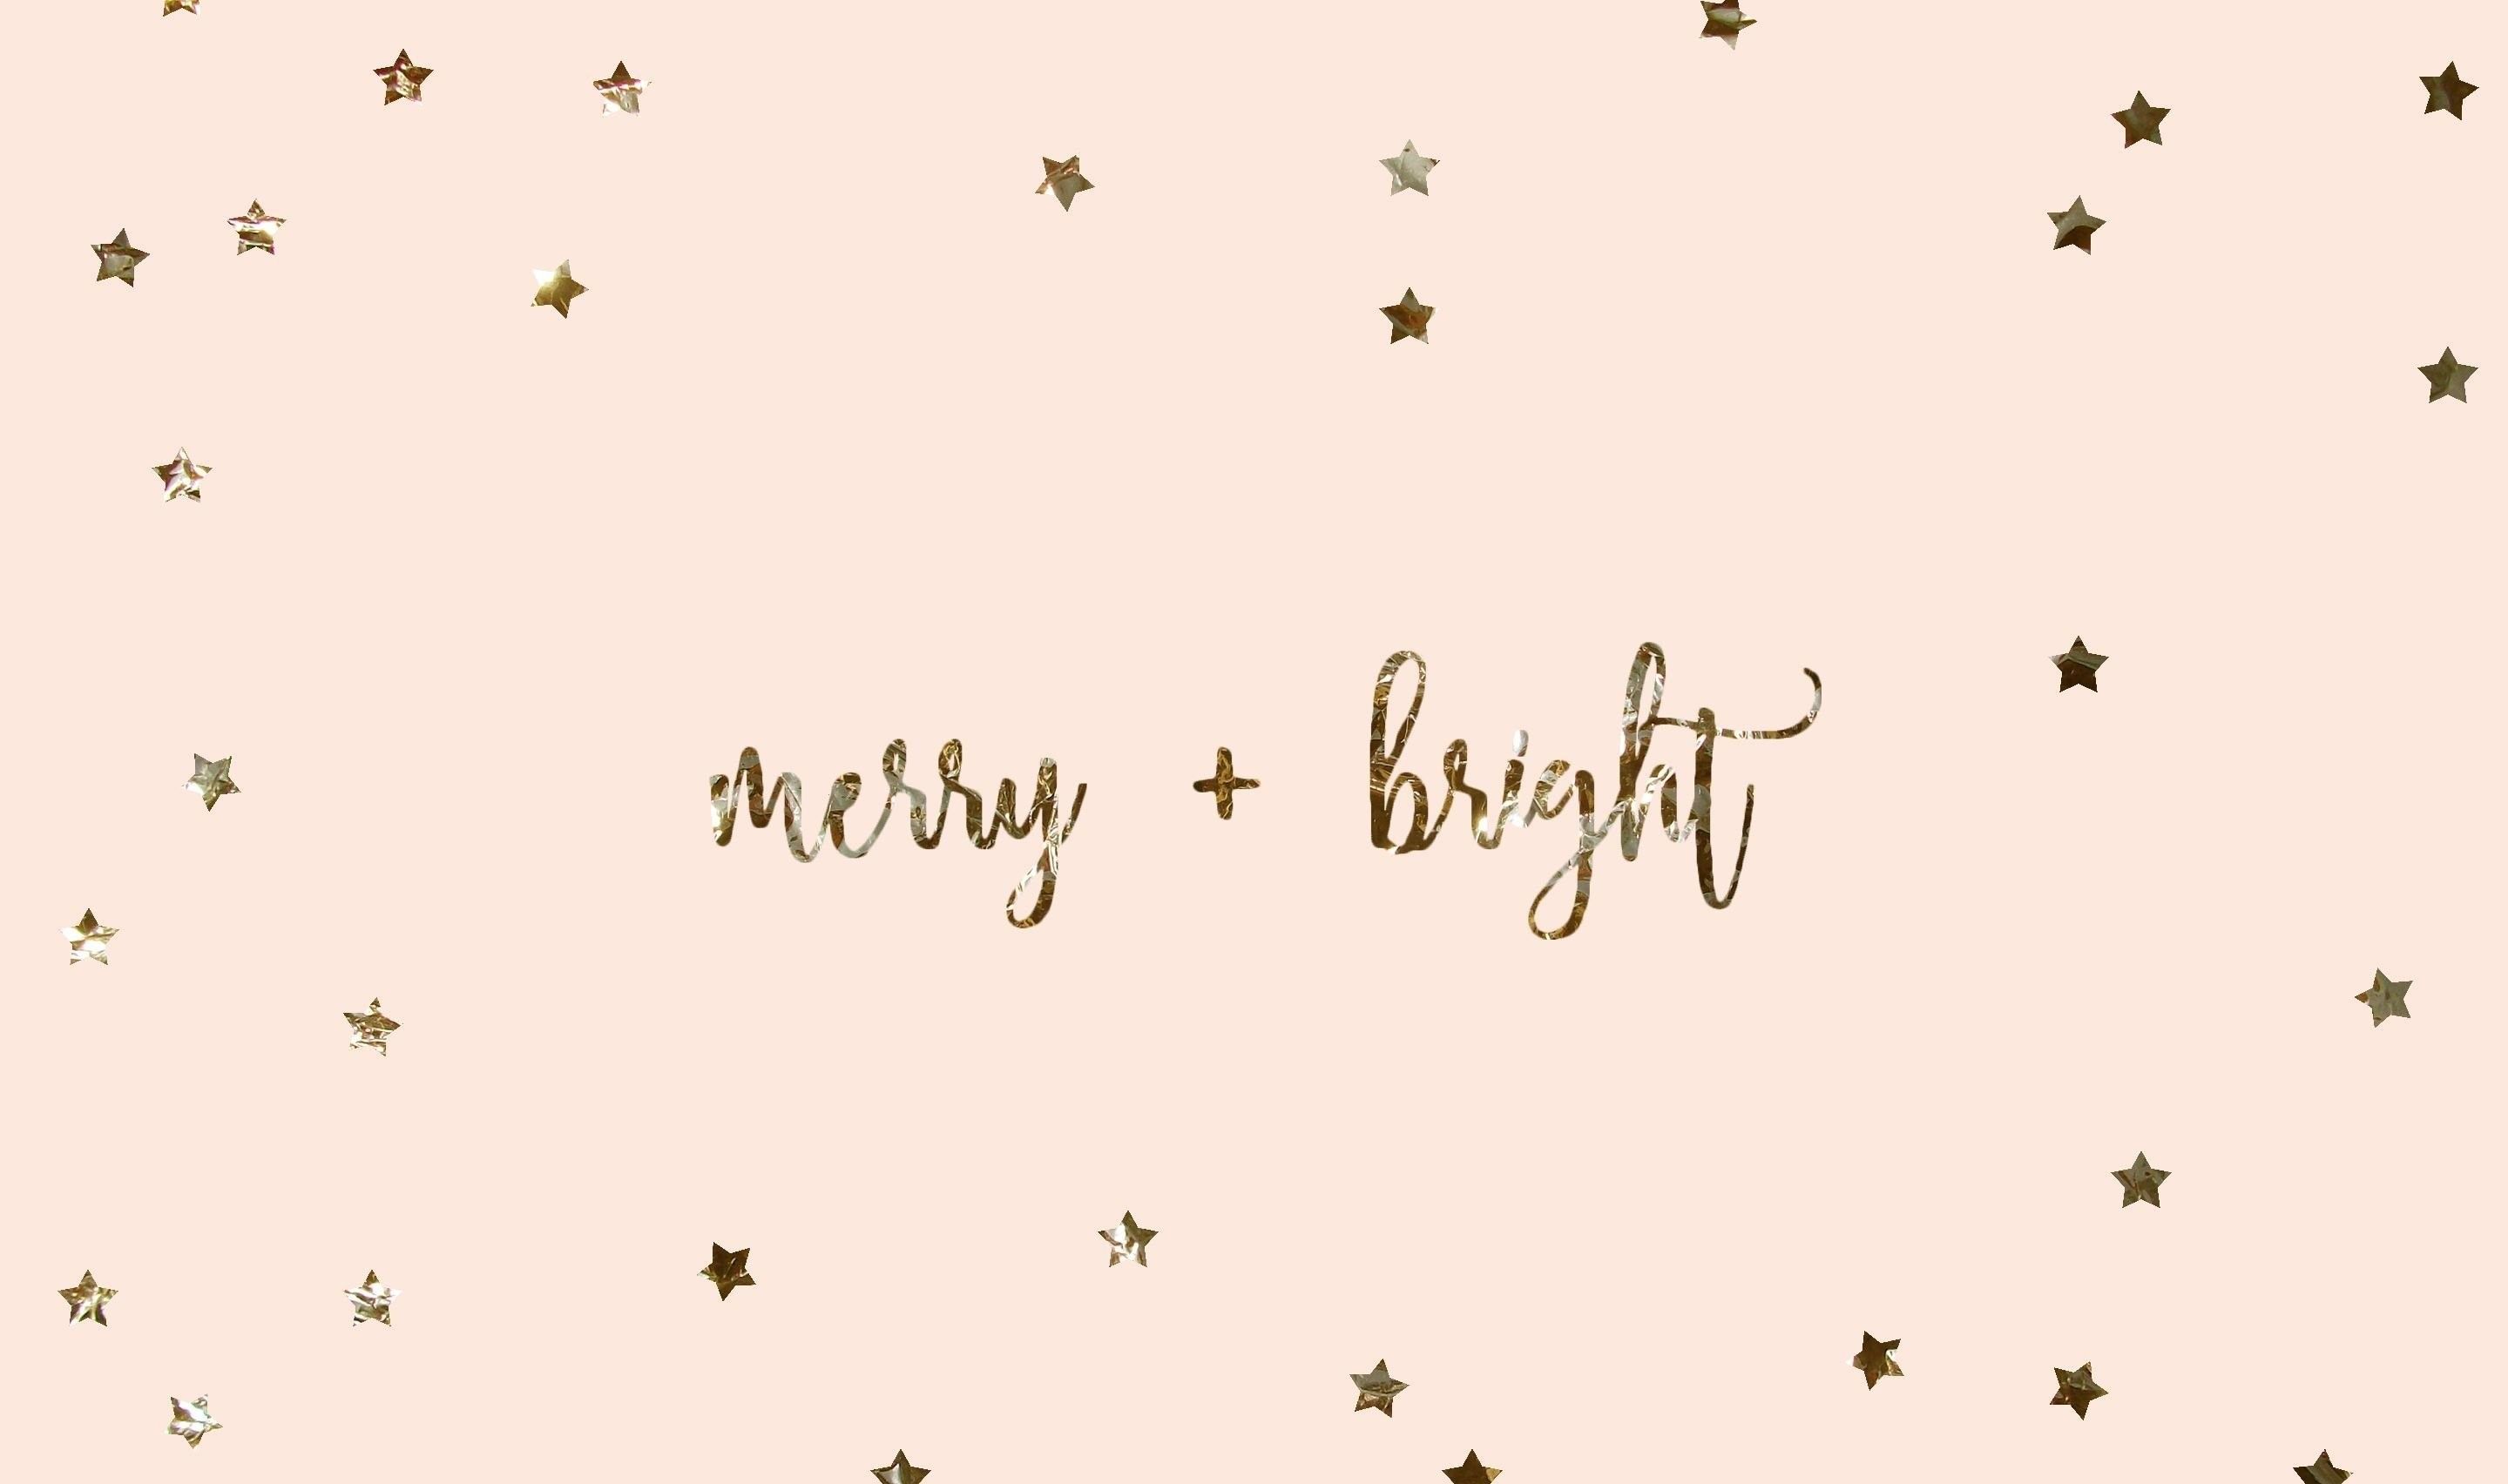 Merry and Bright wallpaper for your phone or desktop. - Desktop